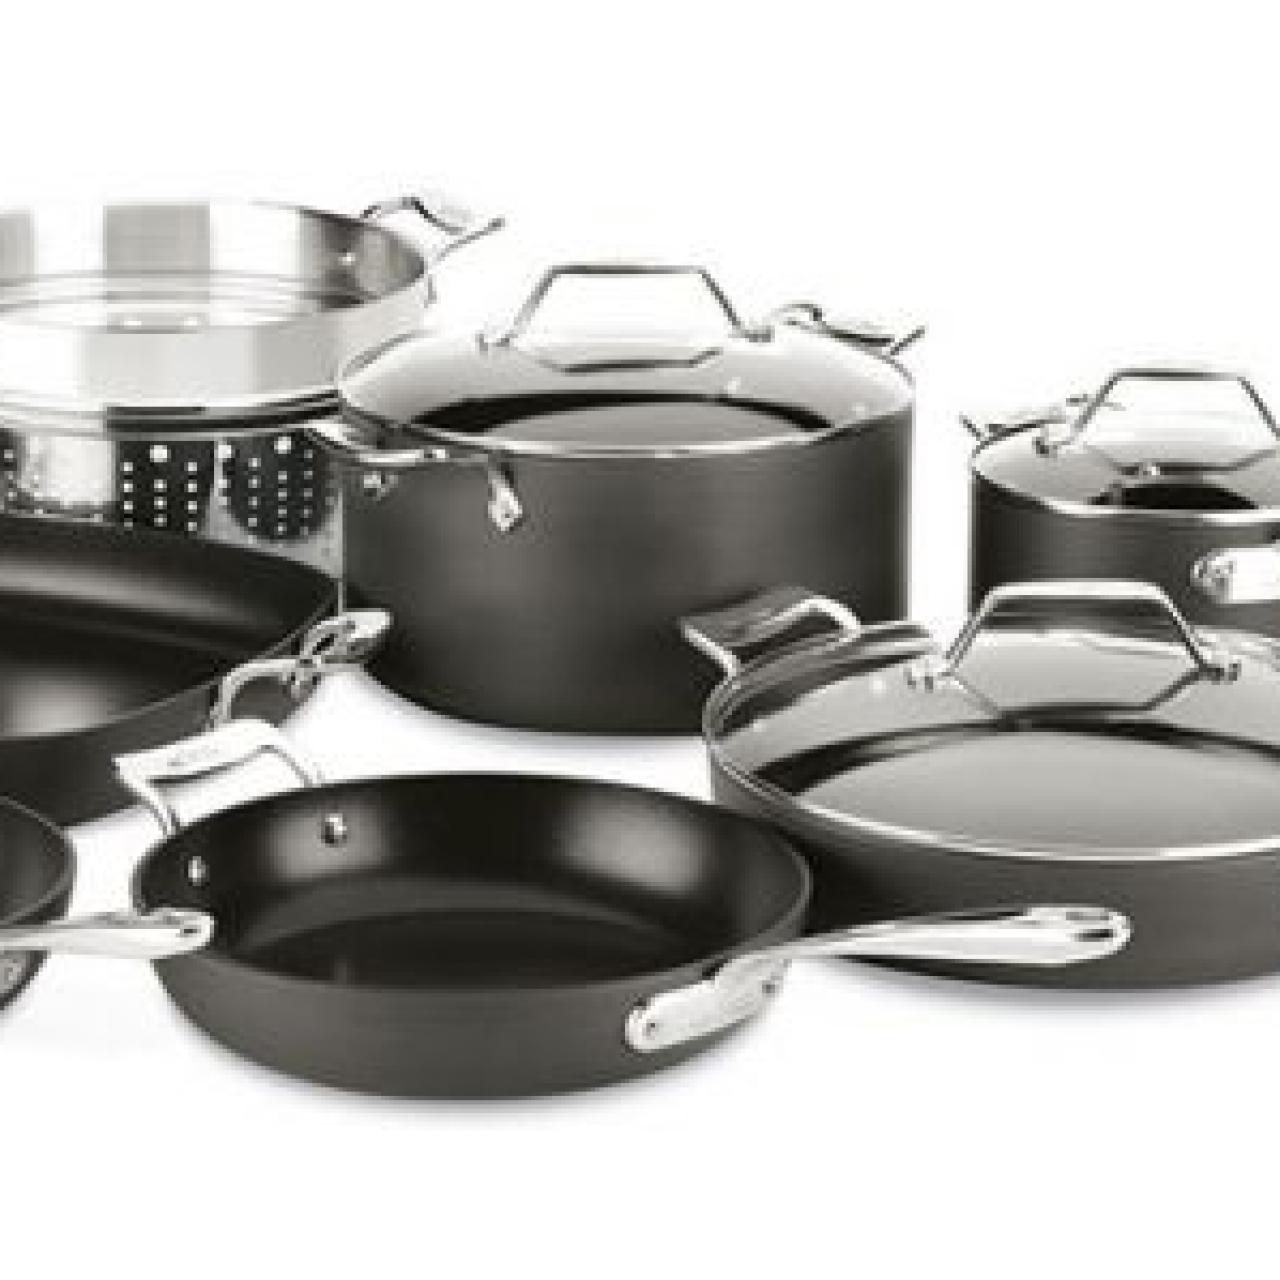 All-Clad: Save big on nonstick cookware at this huge warehouse sale